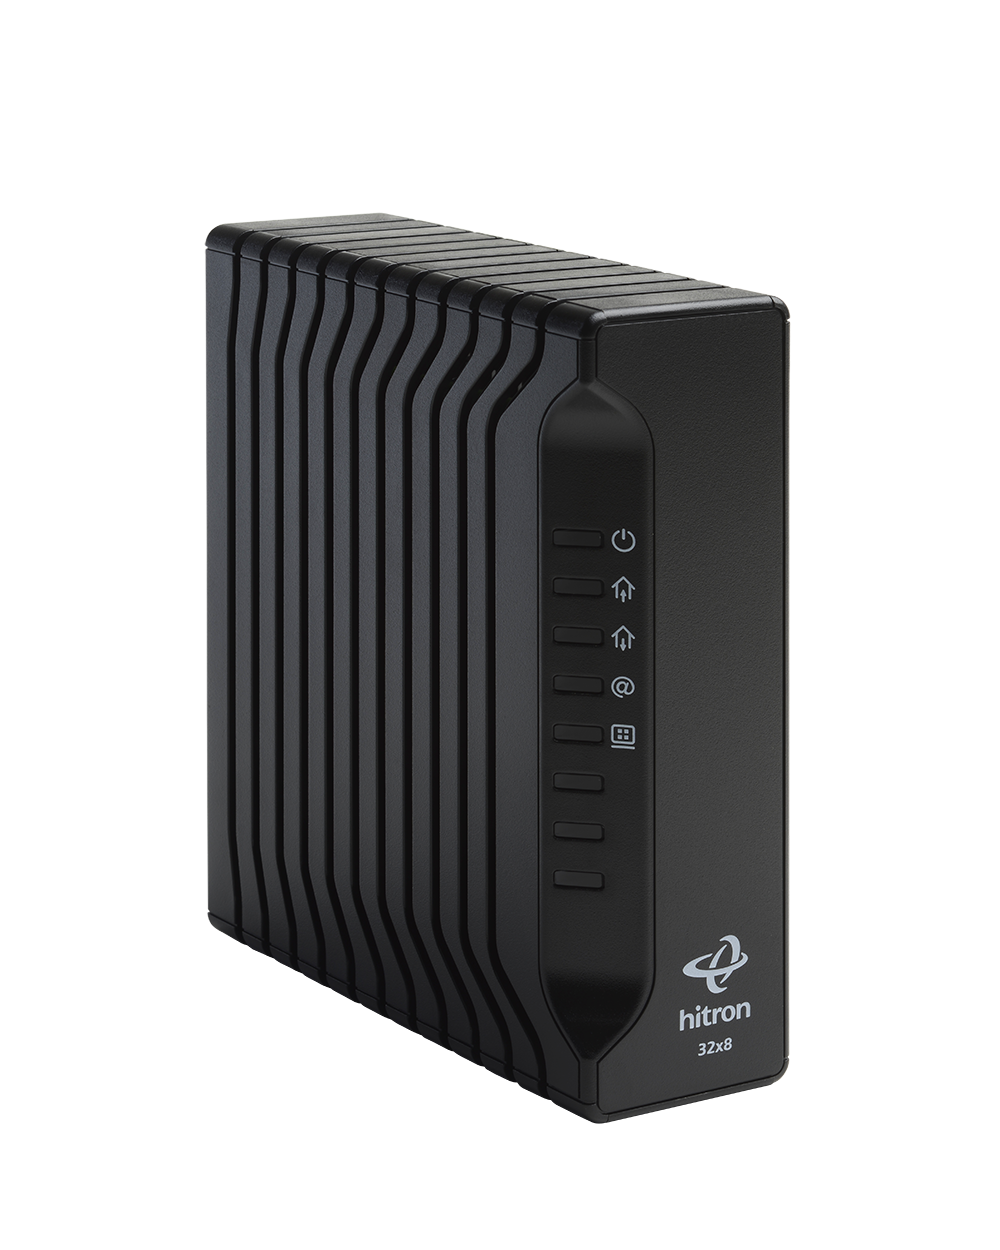 DOCSIS 3.0 Cable Modem from Hitron - CDA3-35